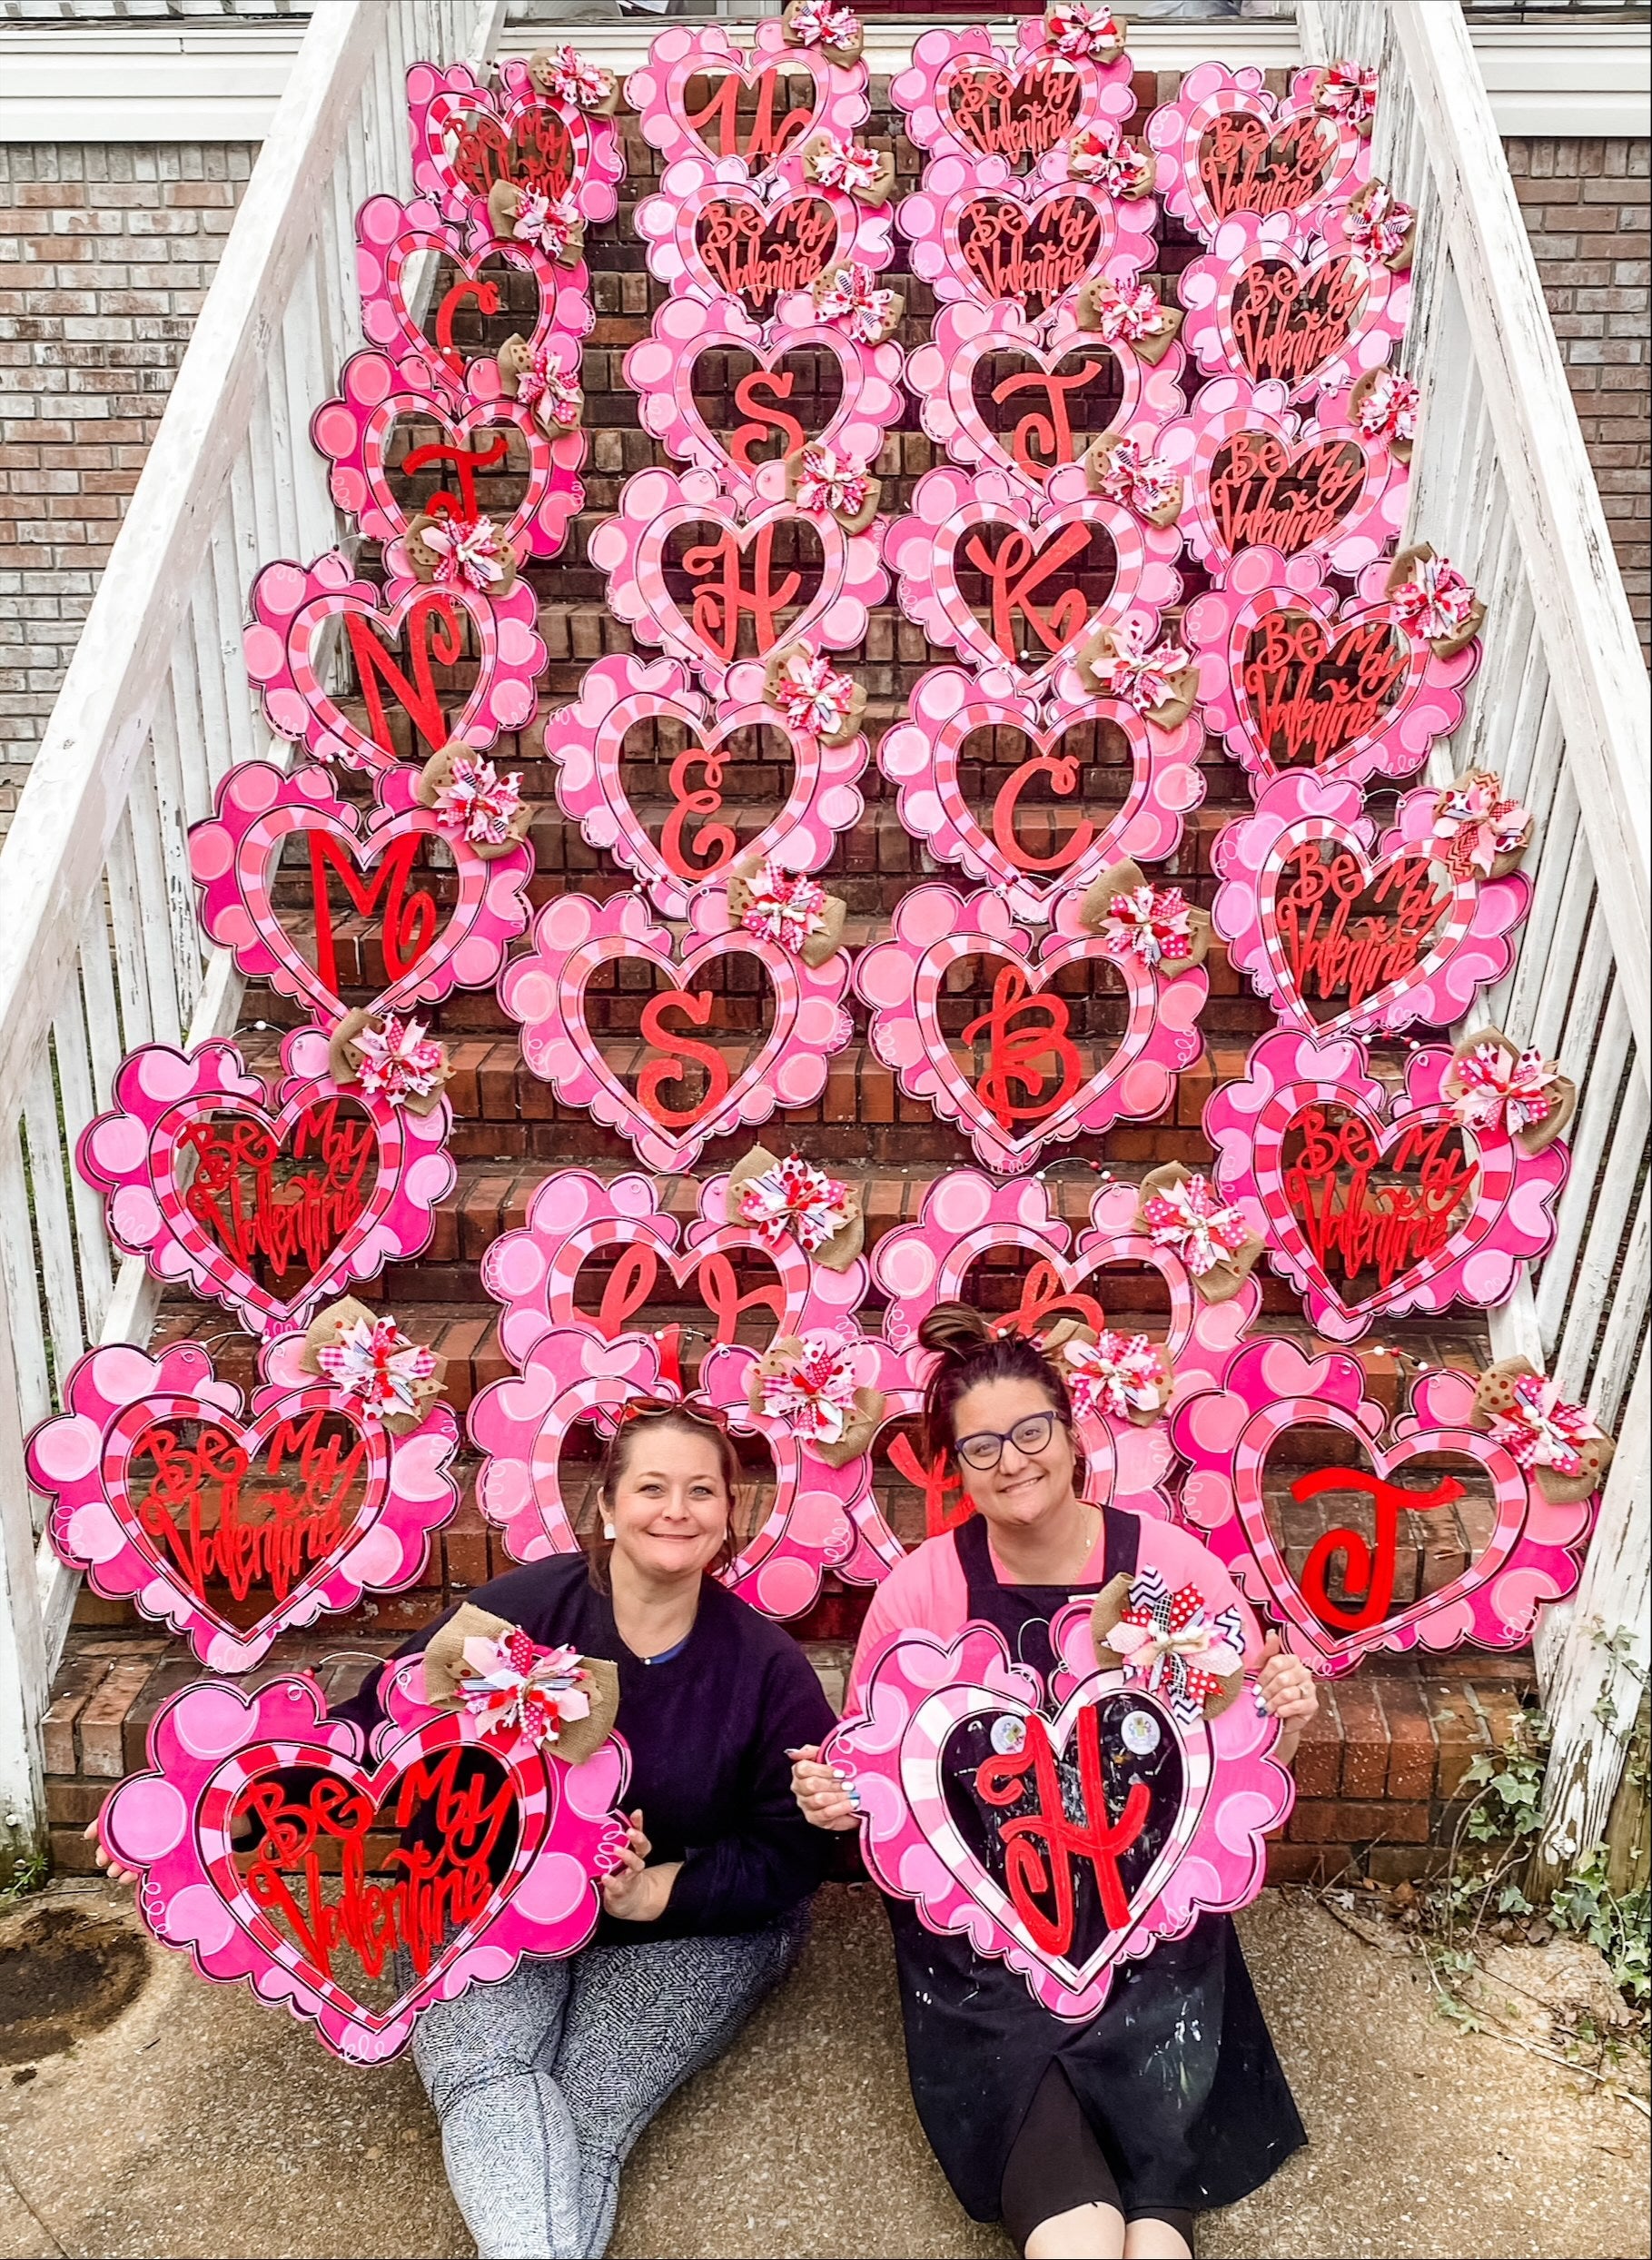 The creators of Queen of My Castle Designs with many heart-shaped door hangers propped against steps